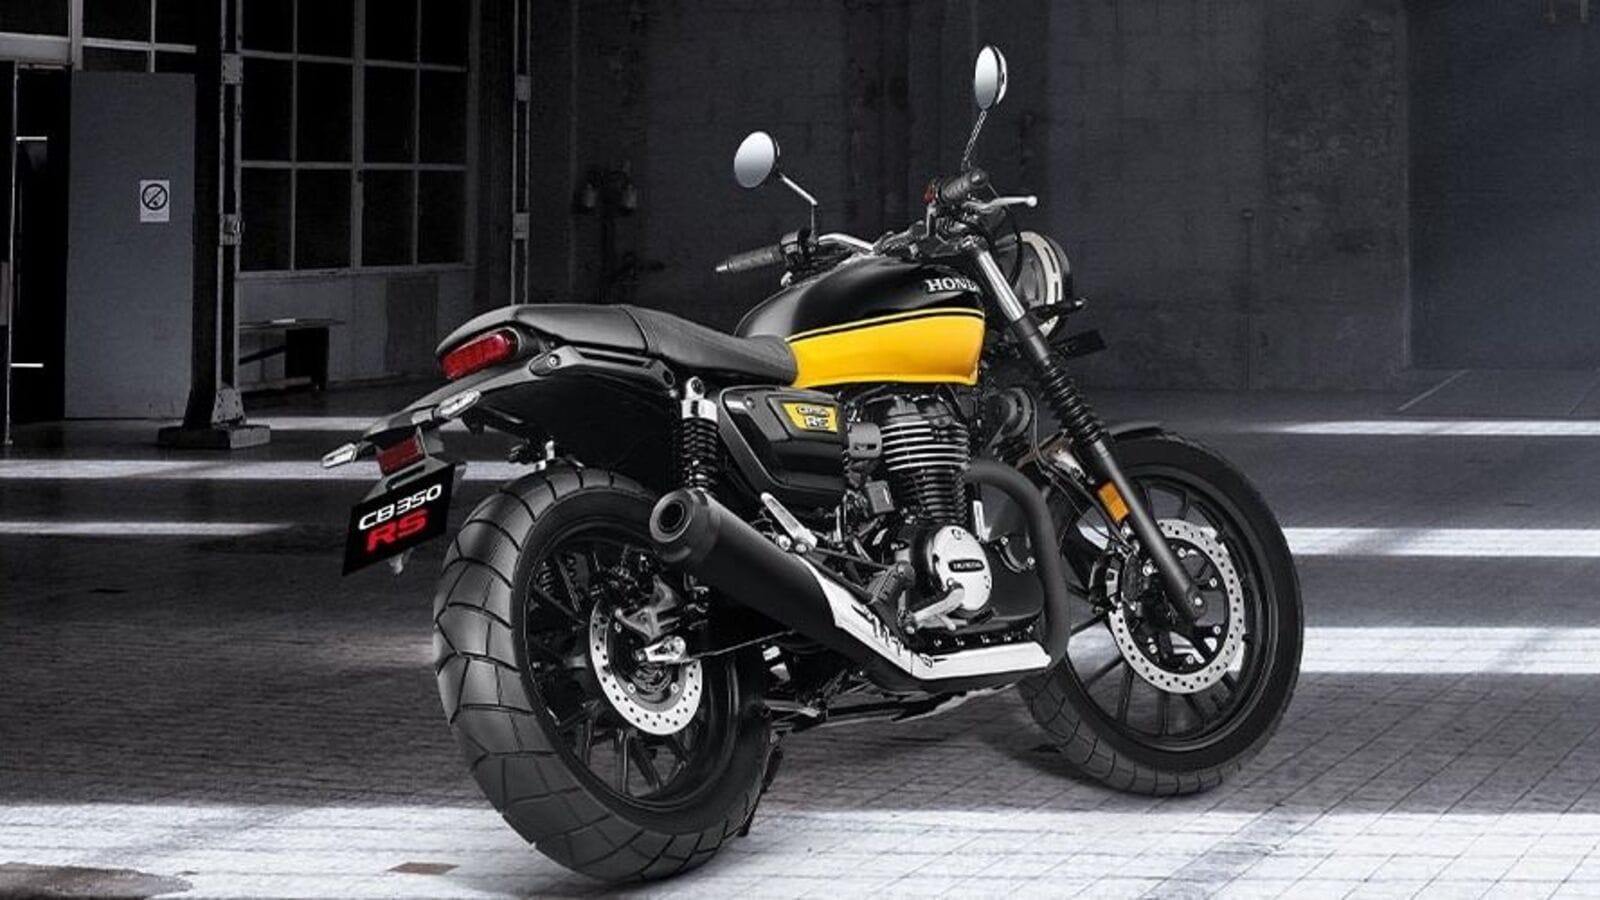 Honda CB350 Cafe Racer to launch tomorrow What to expect? HT Auto